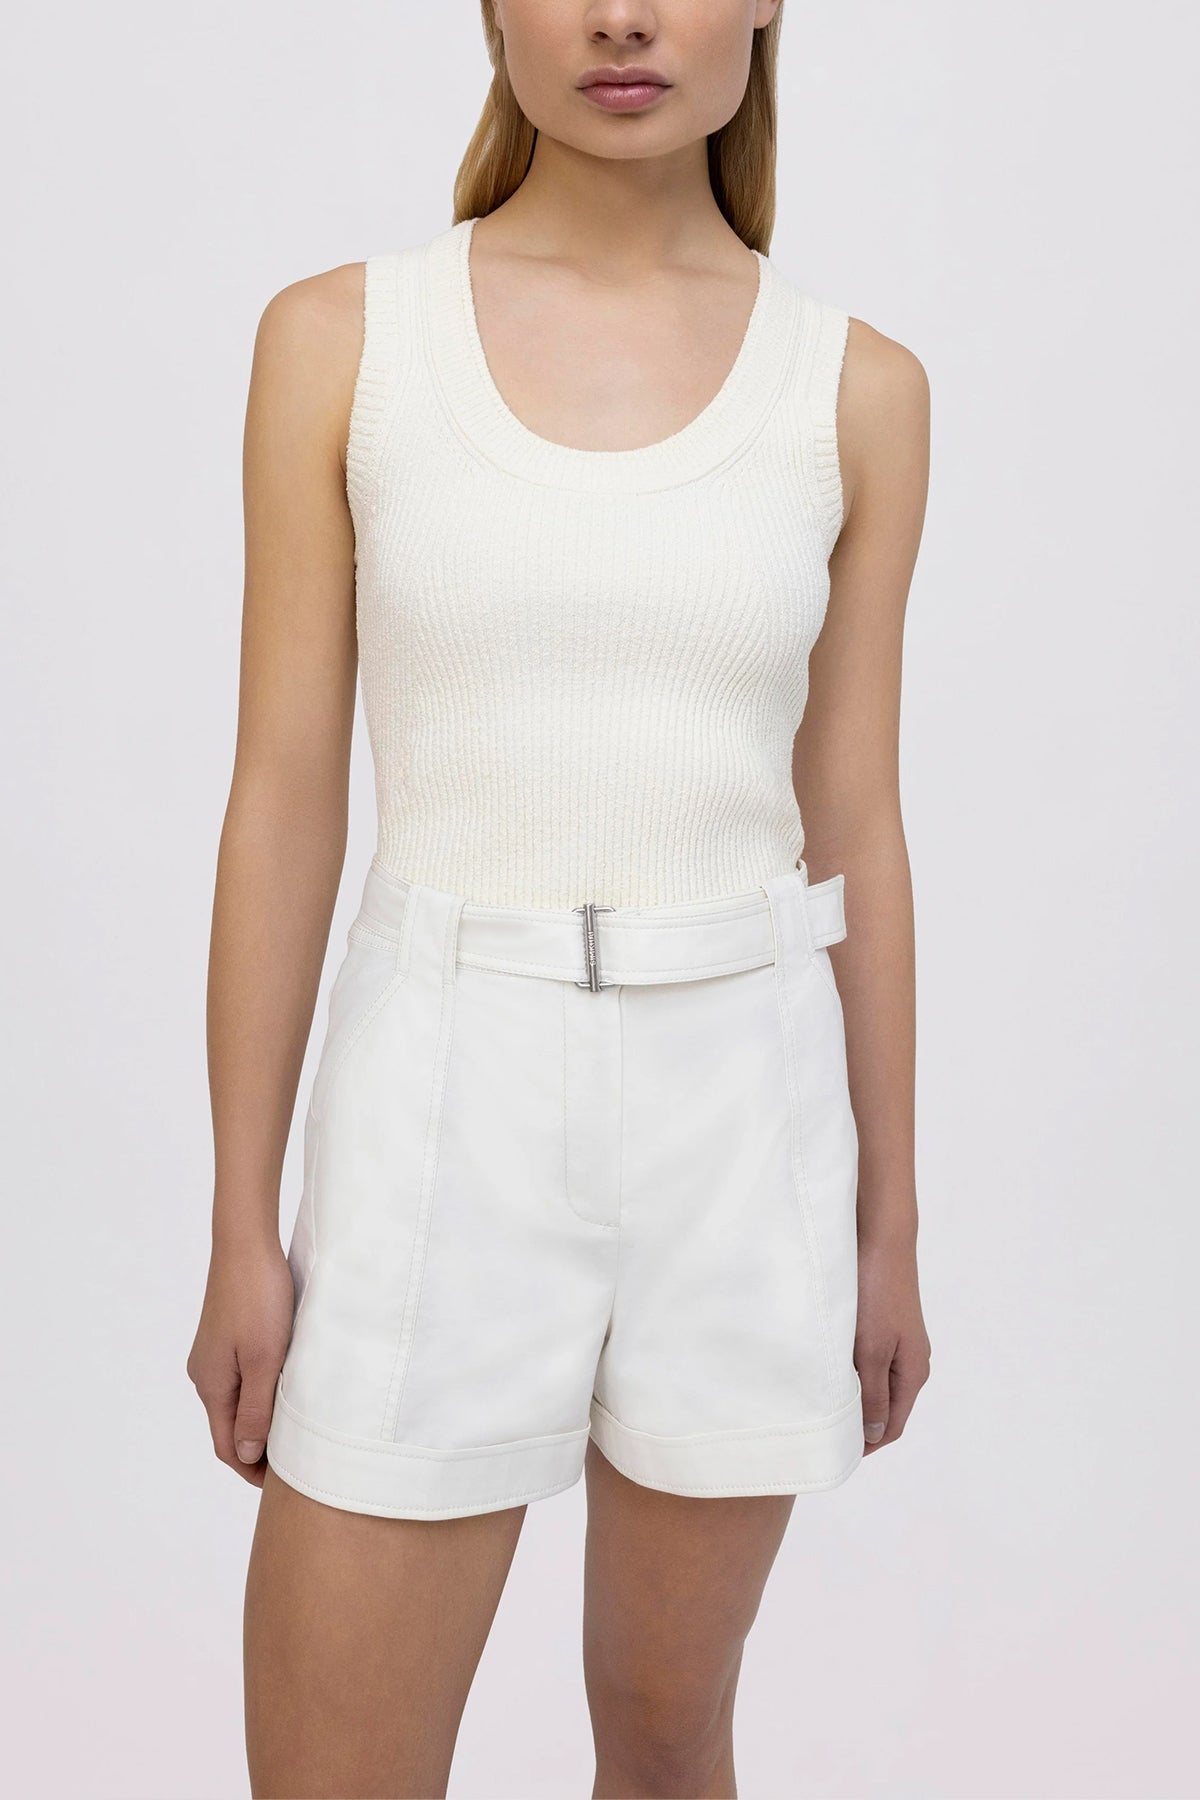 Lourie Belted Shorts in White - shop-olivia.com